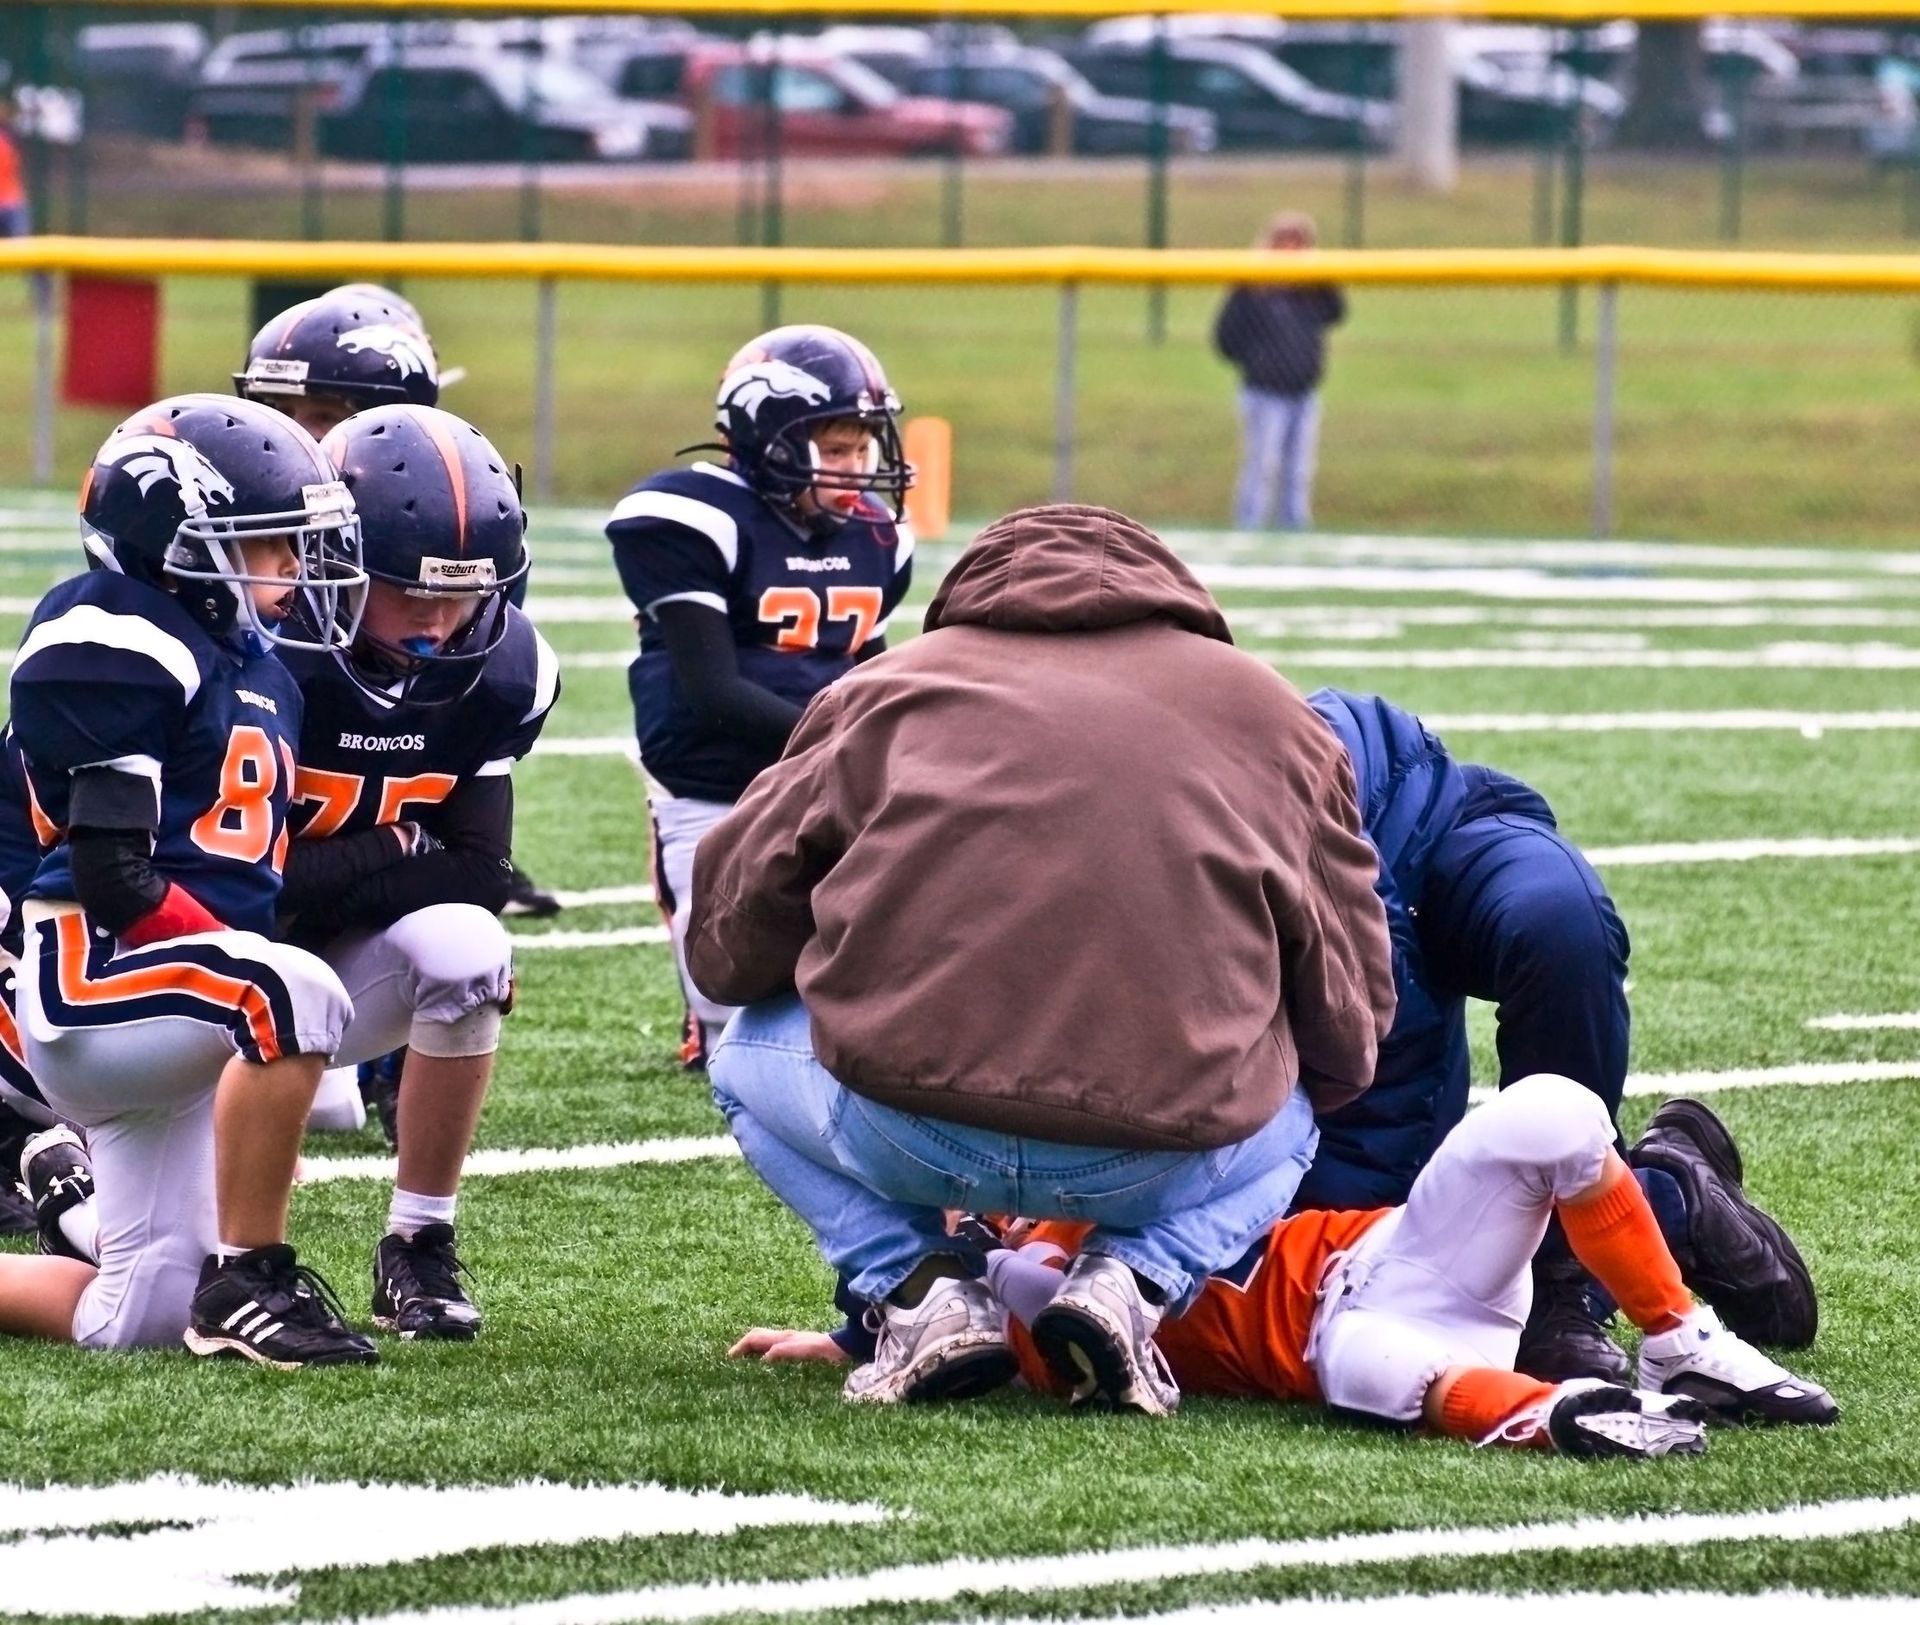 Children's Head Injuries Caused by Sports